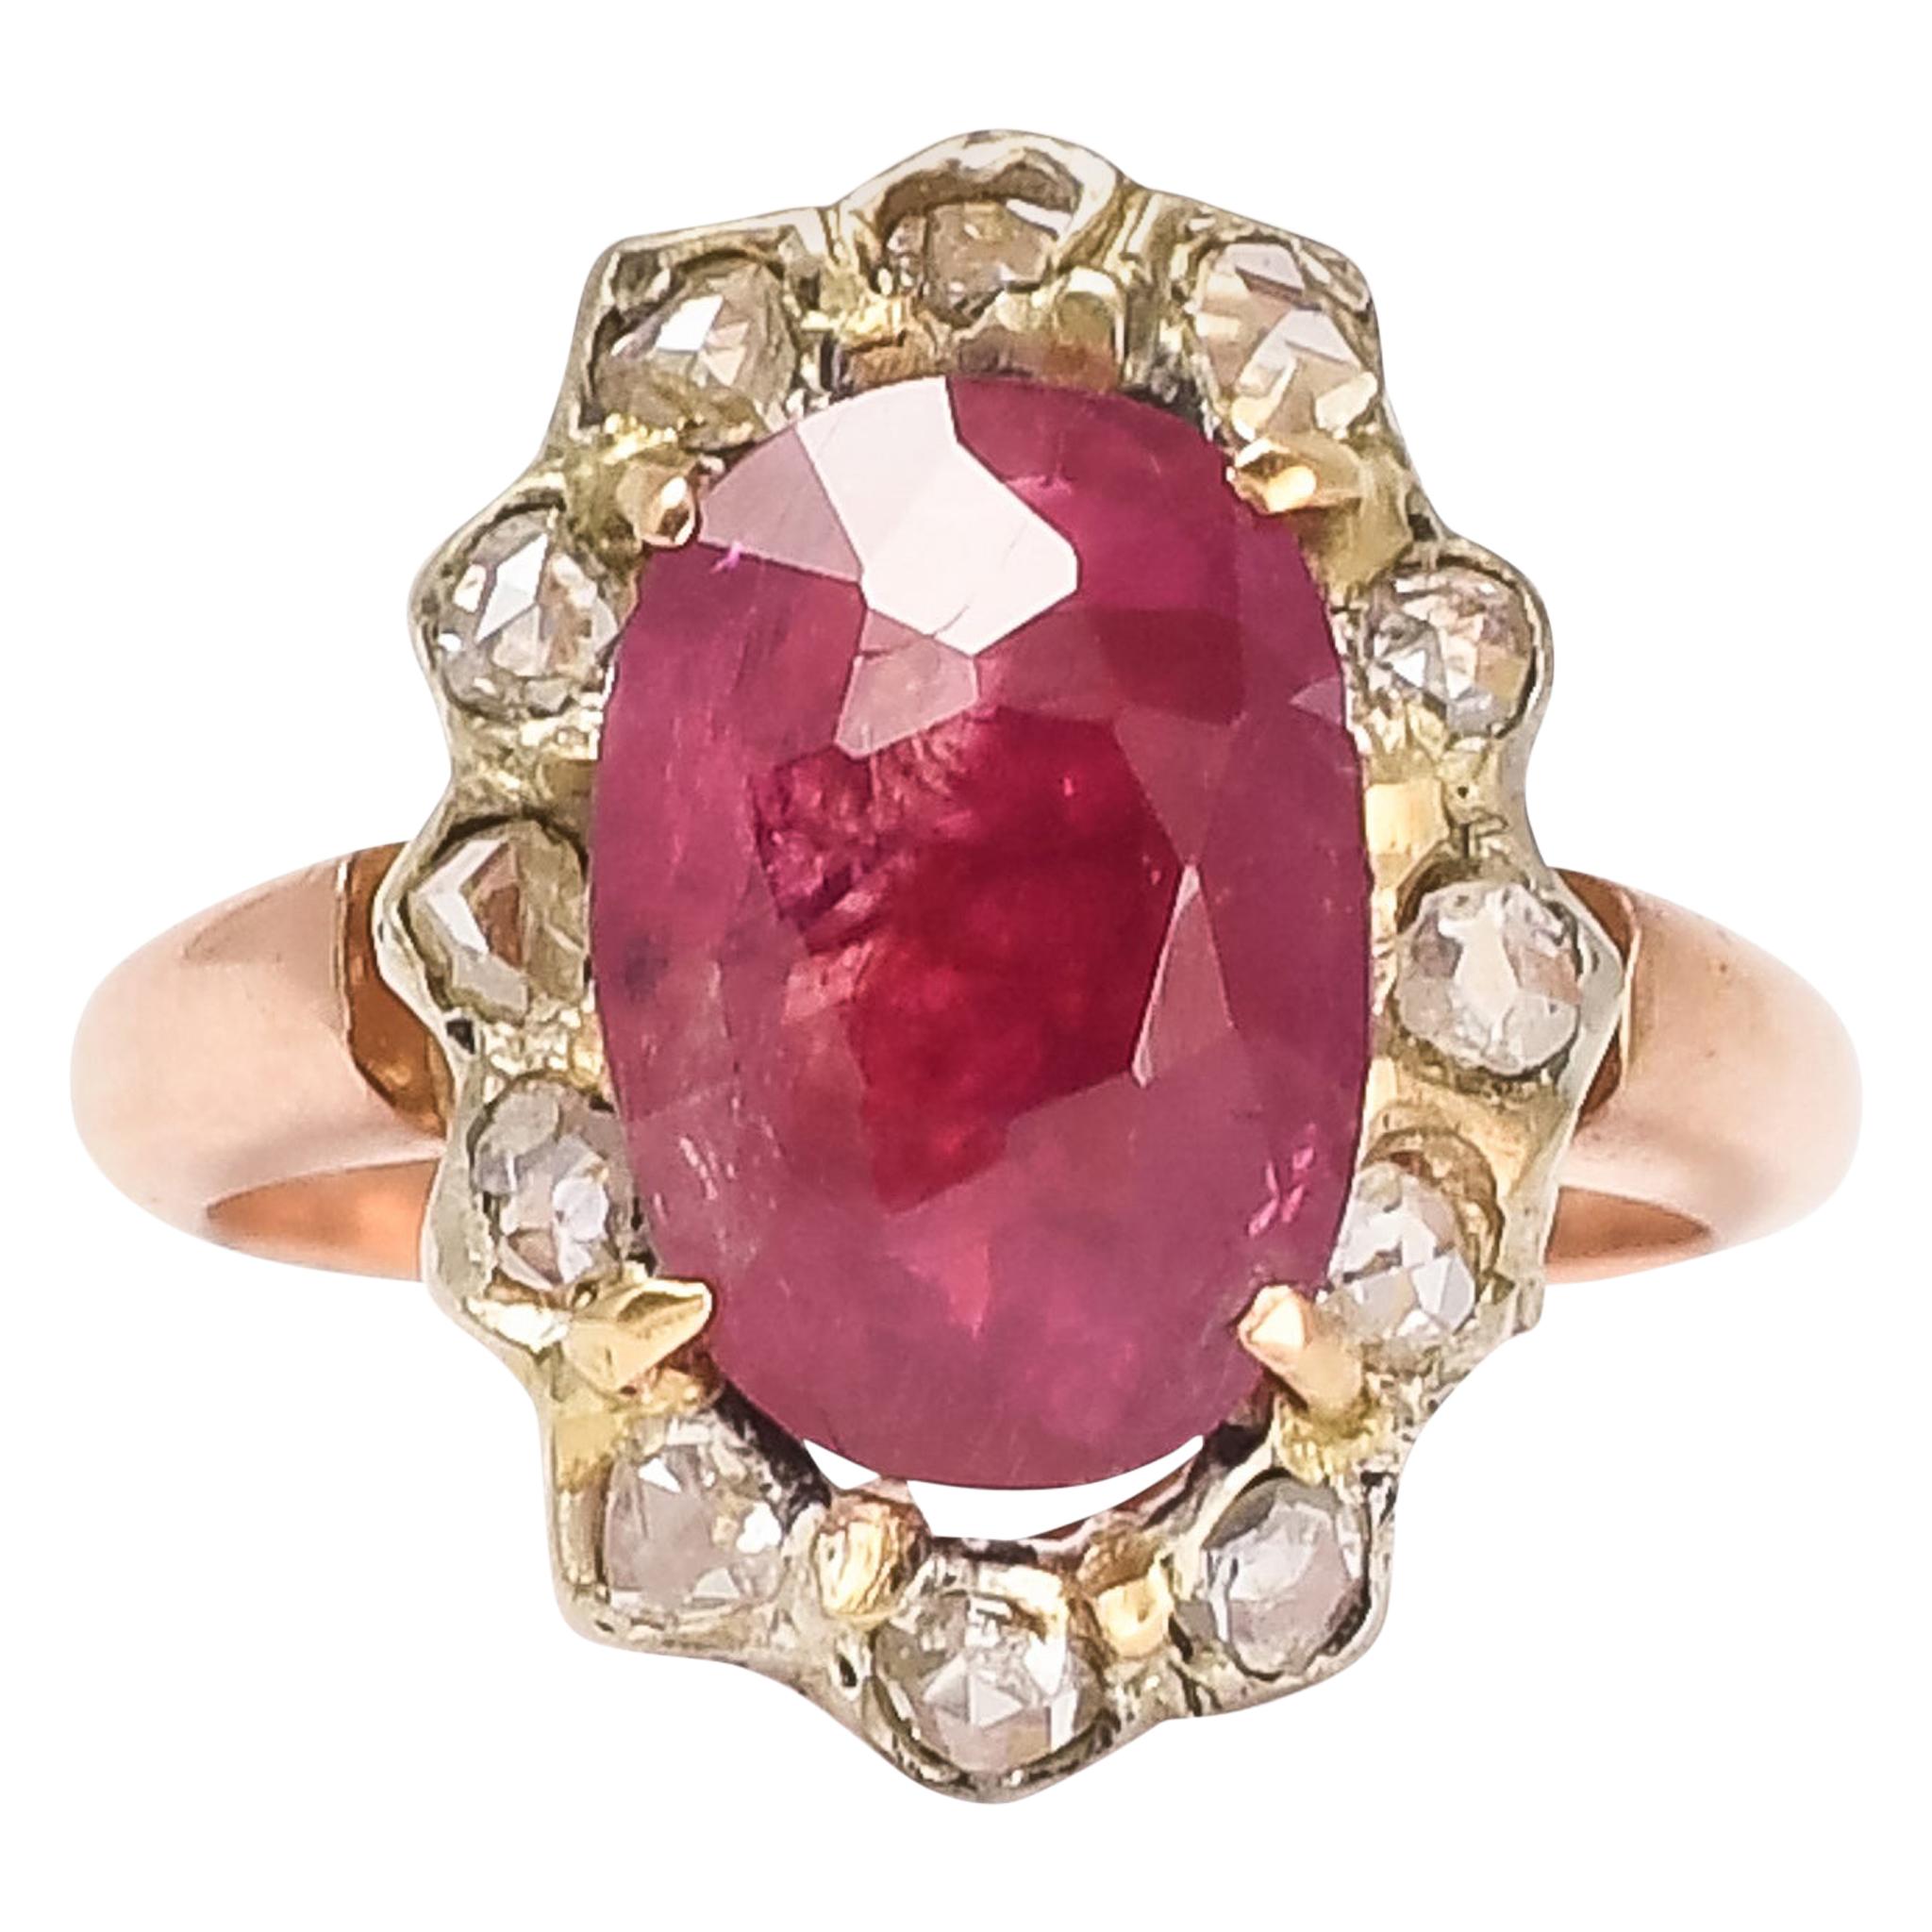 Antique Victorian Certified 5 Carat Burma Ruby Cluster Ring